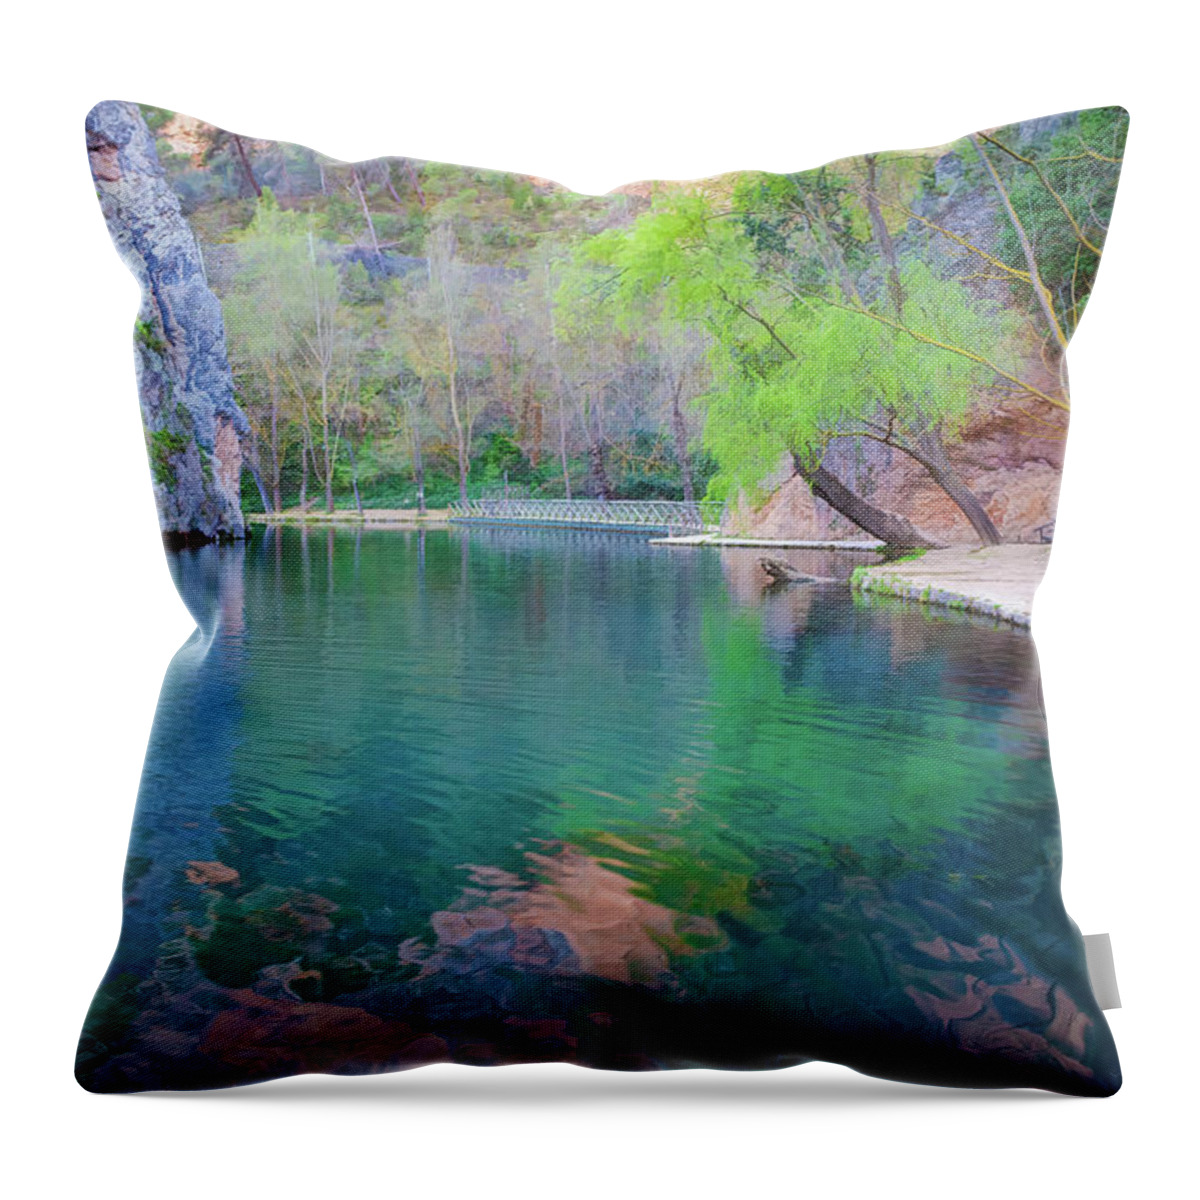 Canvas Throw Pillow featuring the photograph Natural park of the monastery of Piedra - Orton glow Edition - 1 by Jordi Carrio Jamila